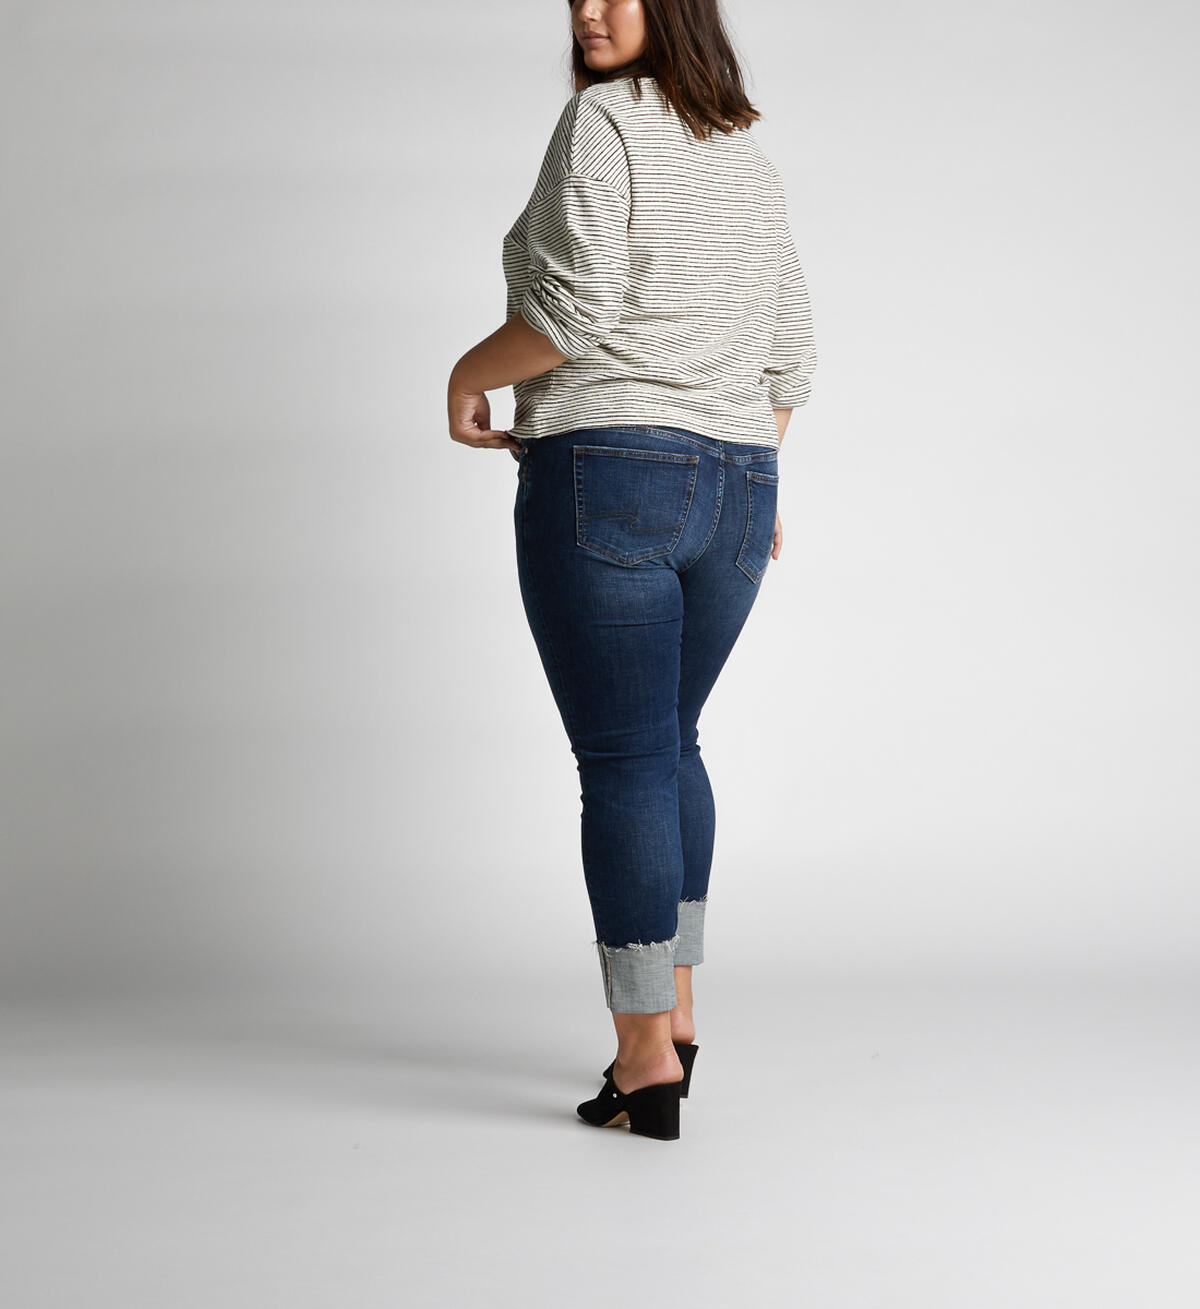 Elyse Mid-Rise Curvy Relaxed Slim-Leg Jeans, , hi-res image number 1